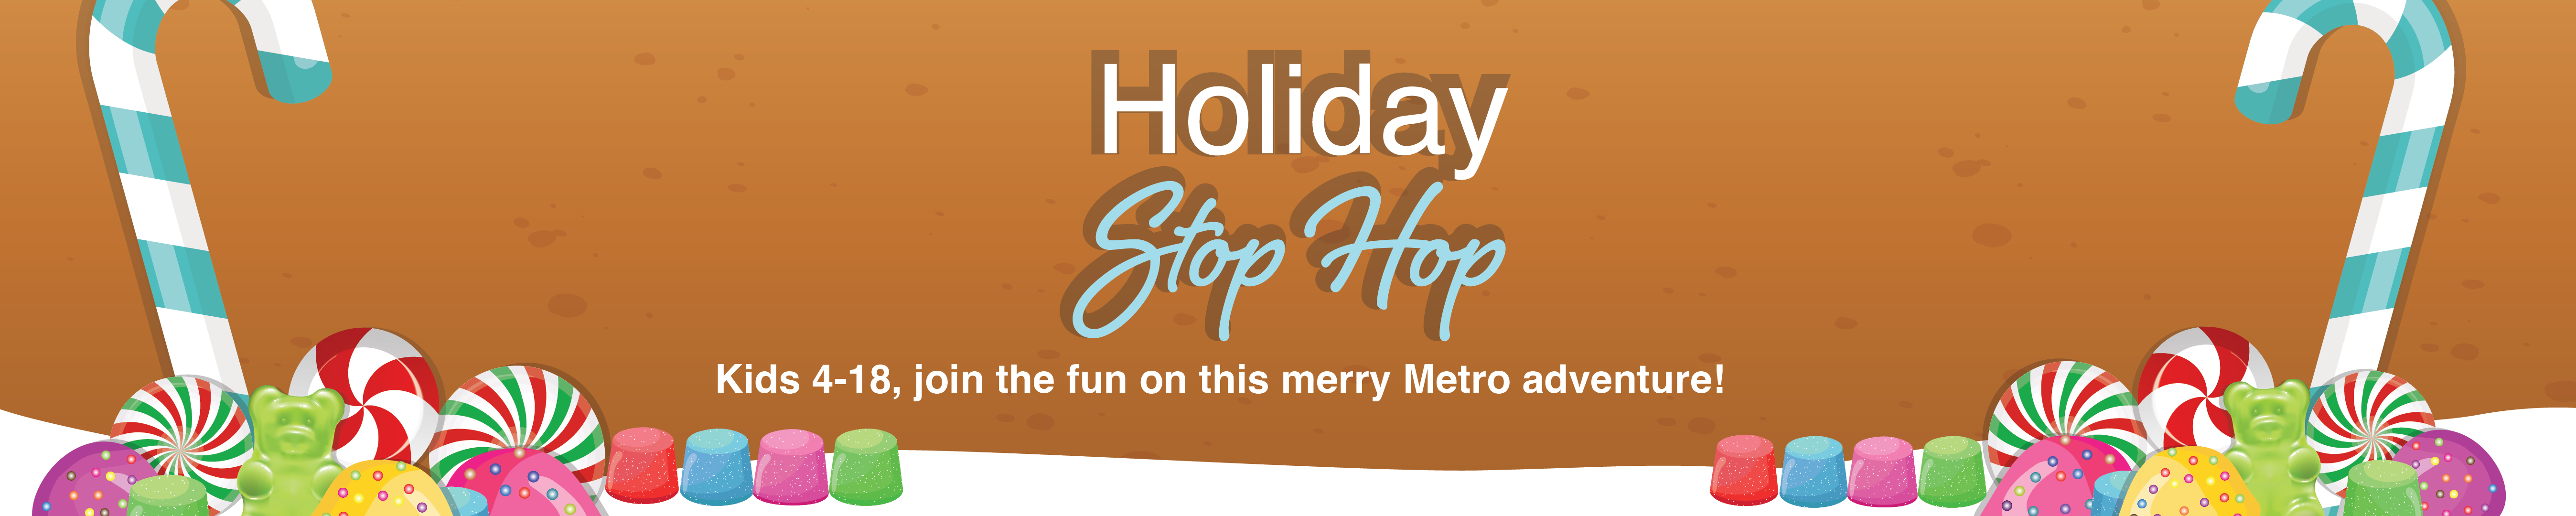 Kids’ Holiday Stop Hop